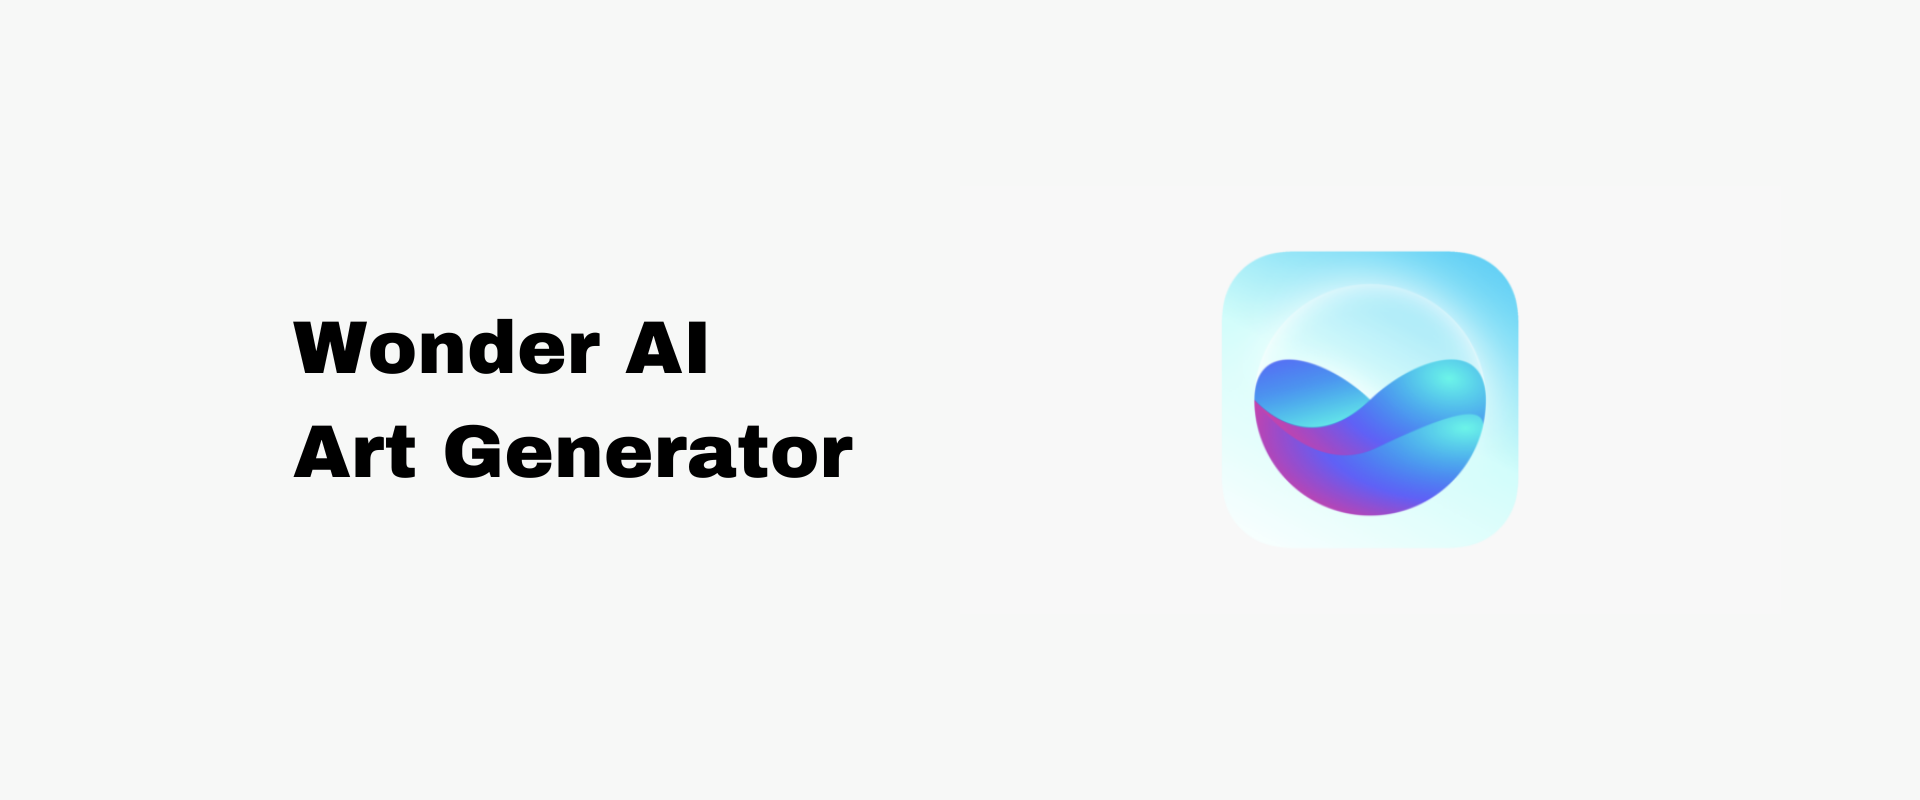 Wonder AI Art Generator – Complete Guide to Wonder-AI Art Generator